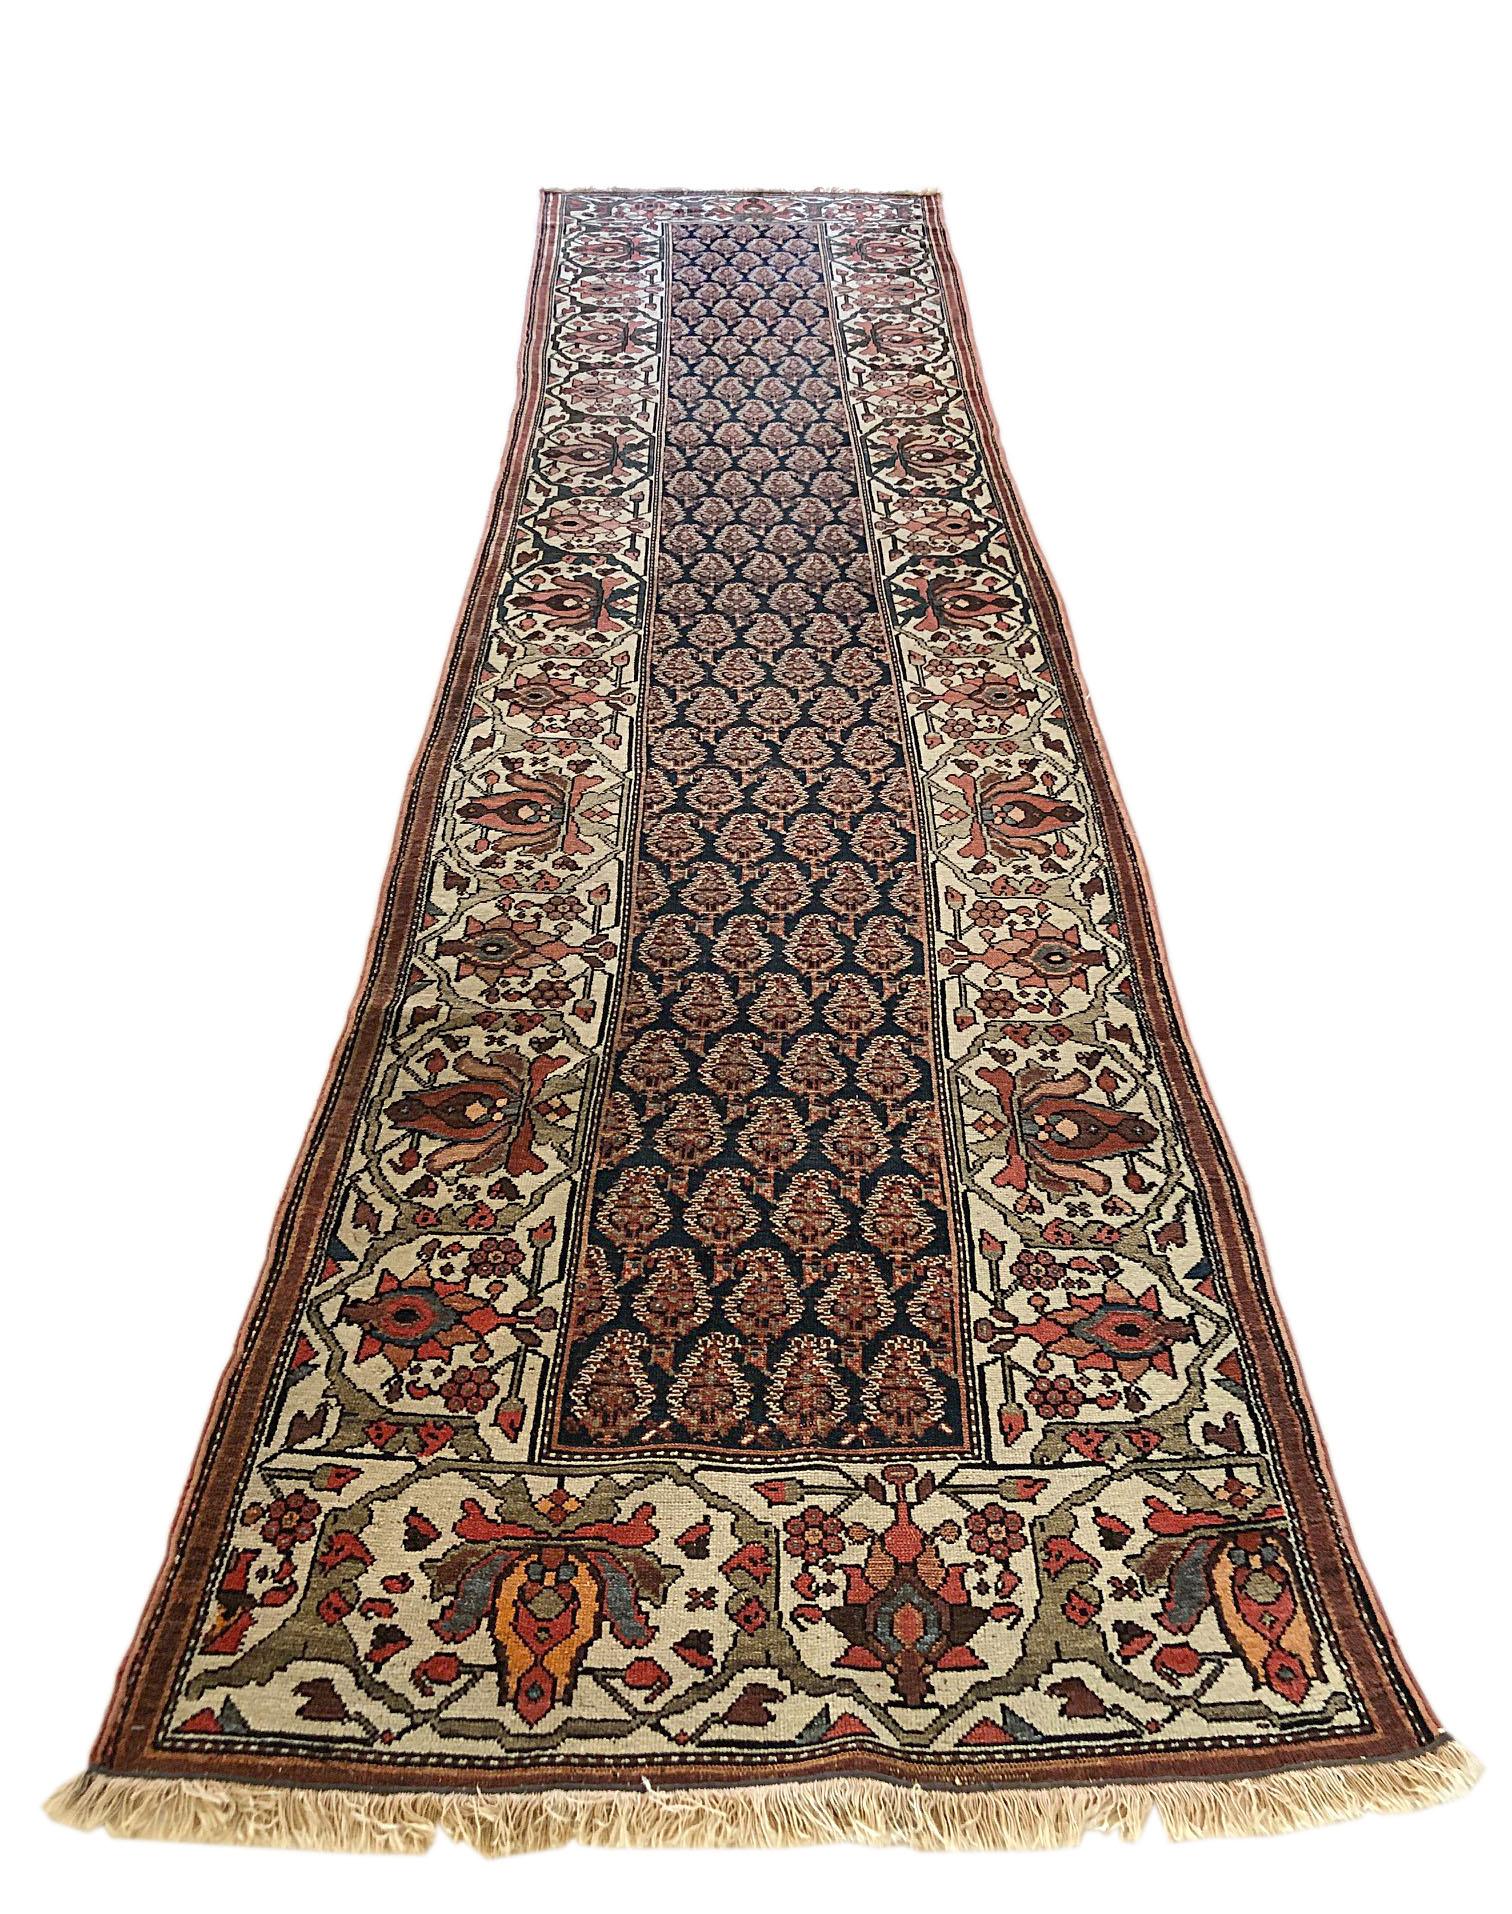 This antique rug is a Persian Bakhtiari with wool pile and wool foundation. This is a very unique piece, circa 1880s. The pile and foundation are wool. The design is all over paisley design. The base color is dark blue with cream border. The size is